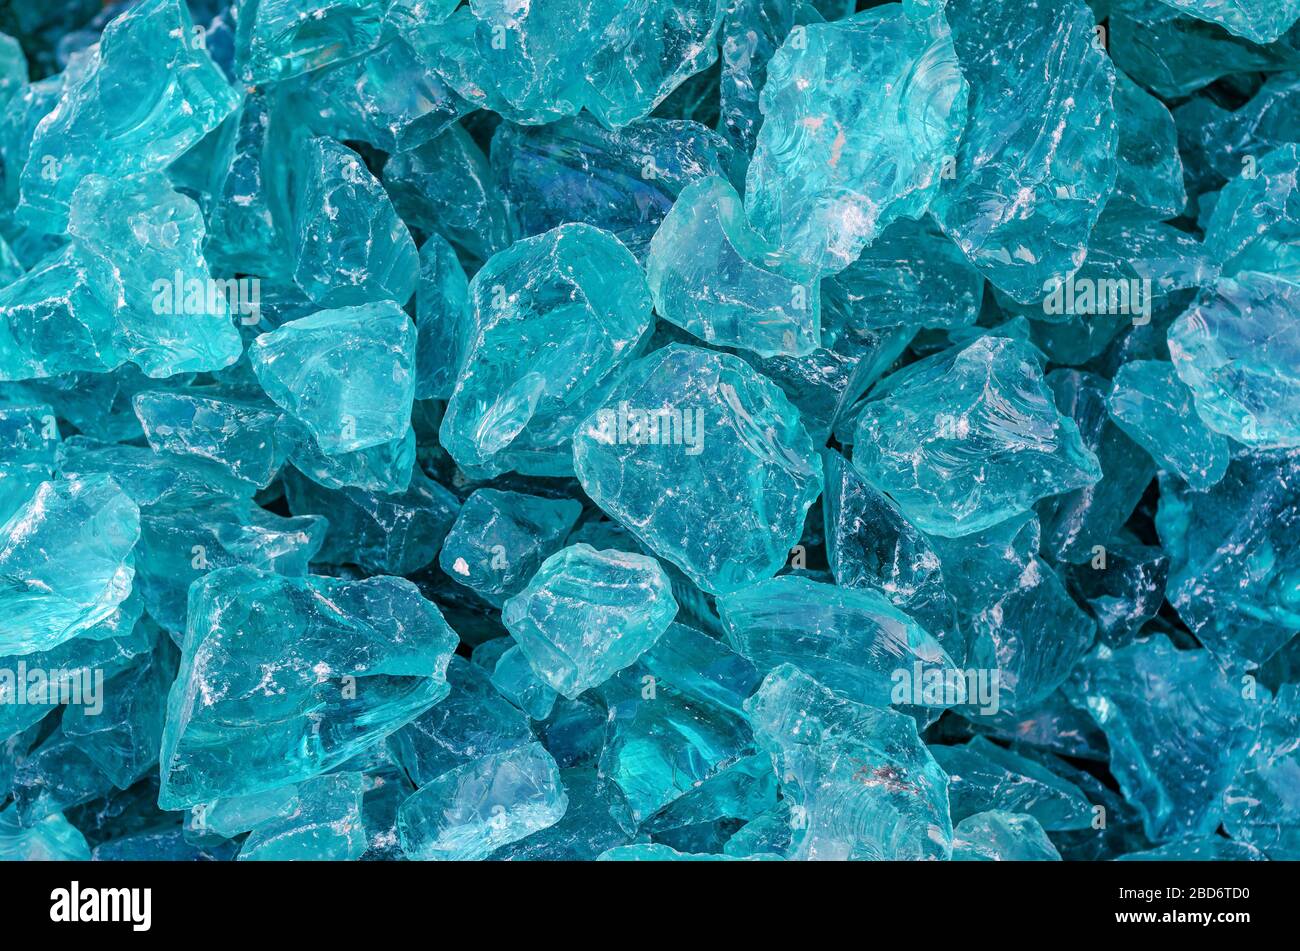 88,509 Shiny Glass Stones Images, Stock Photos, 3D objects, & Vectors